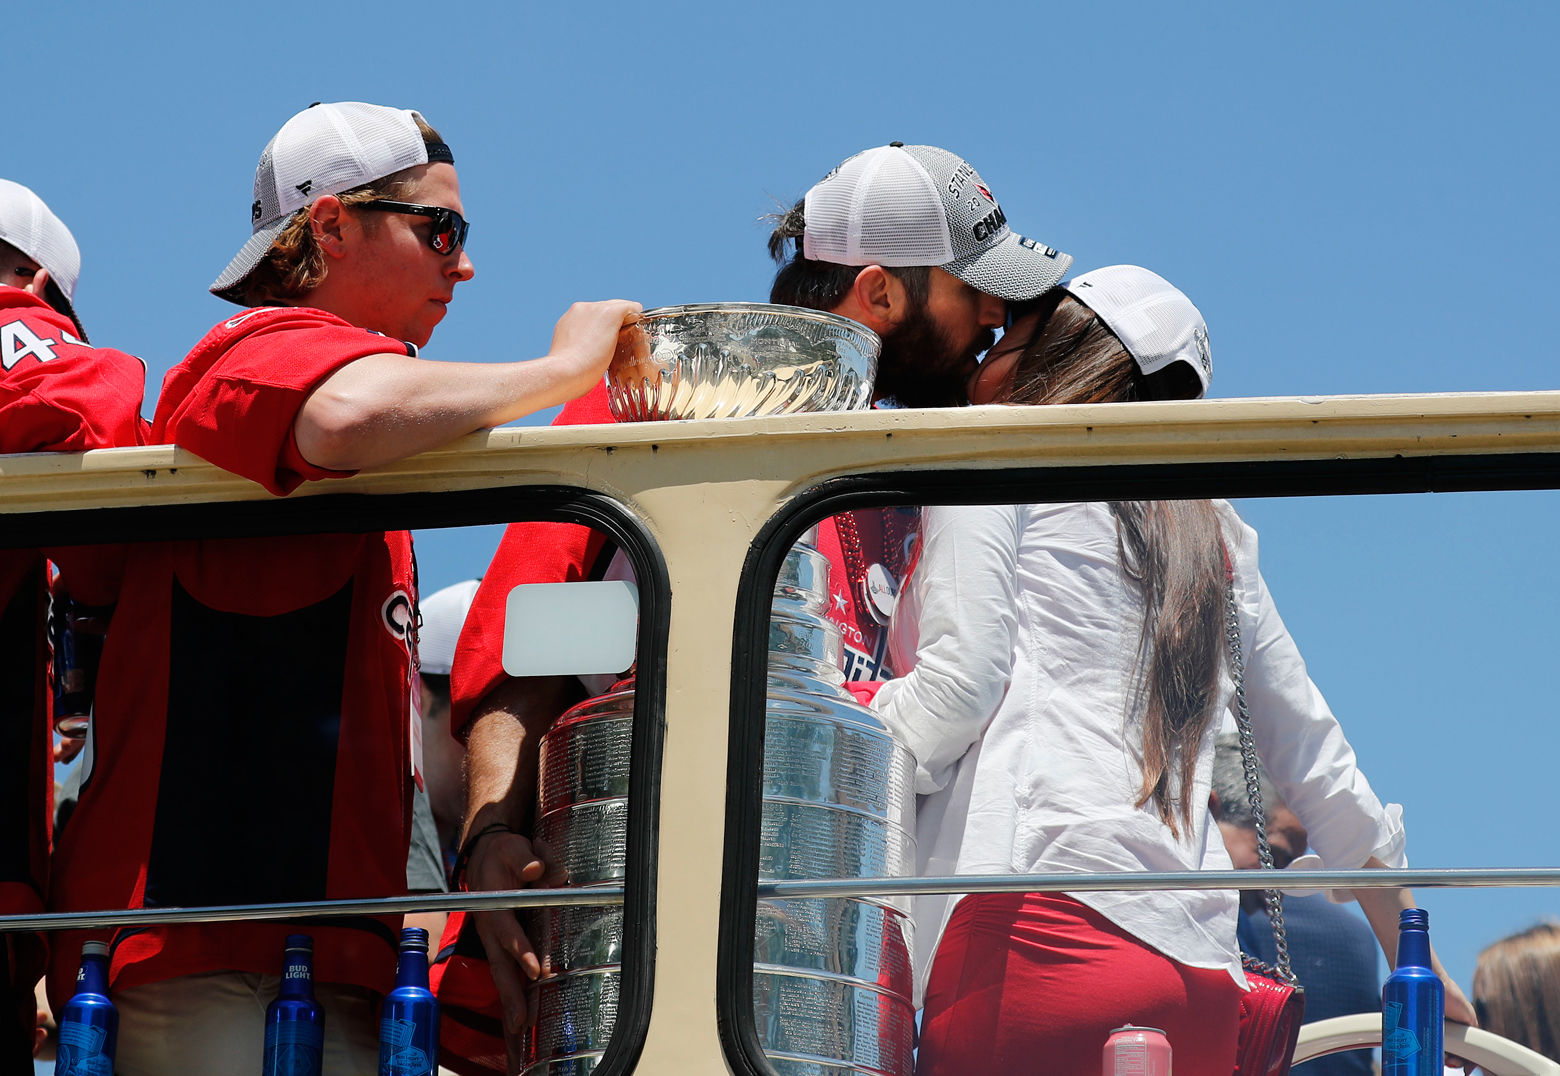 Alex Ovechkin kisses his wife Nastya Ovechkina, right, as they exit the bus during the Stanley Cup victory parade. (AP Photo/Pablo Martinez Monsivais)